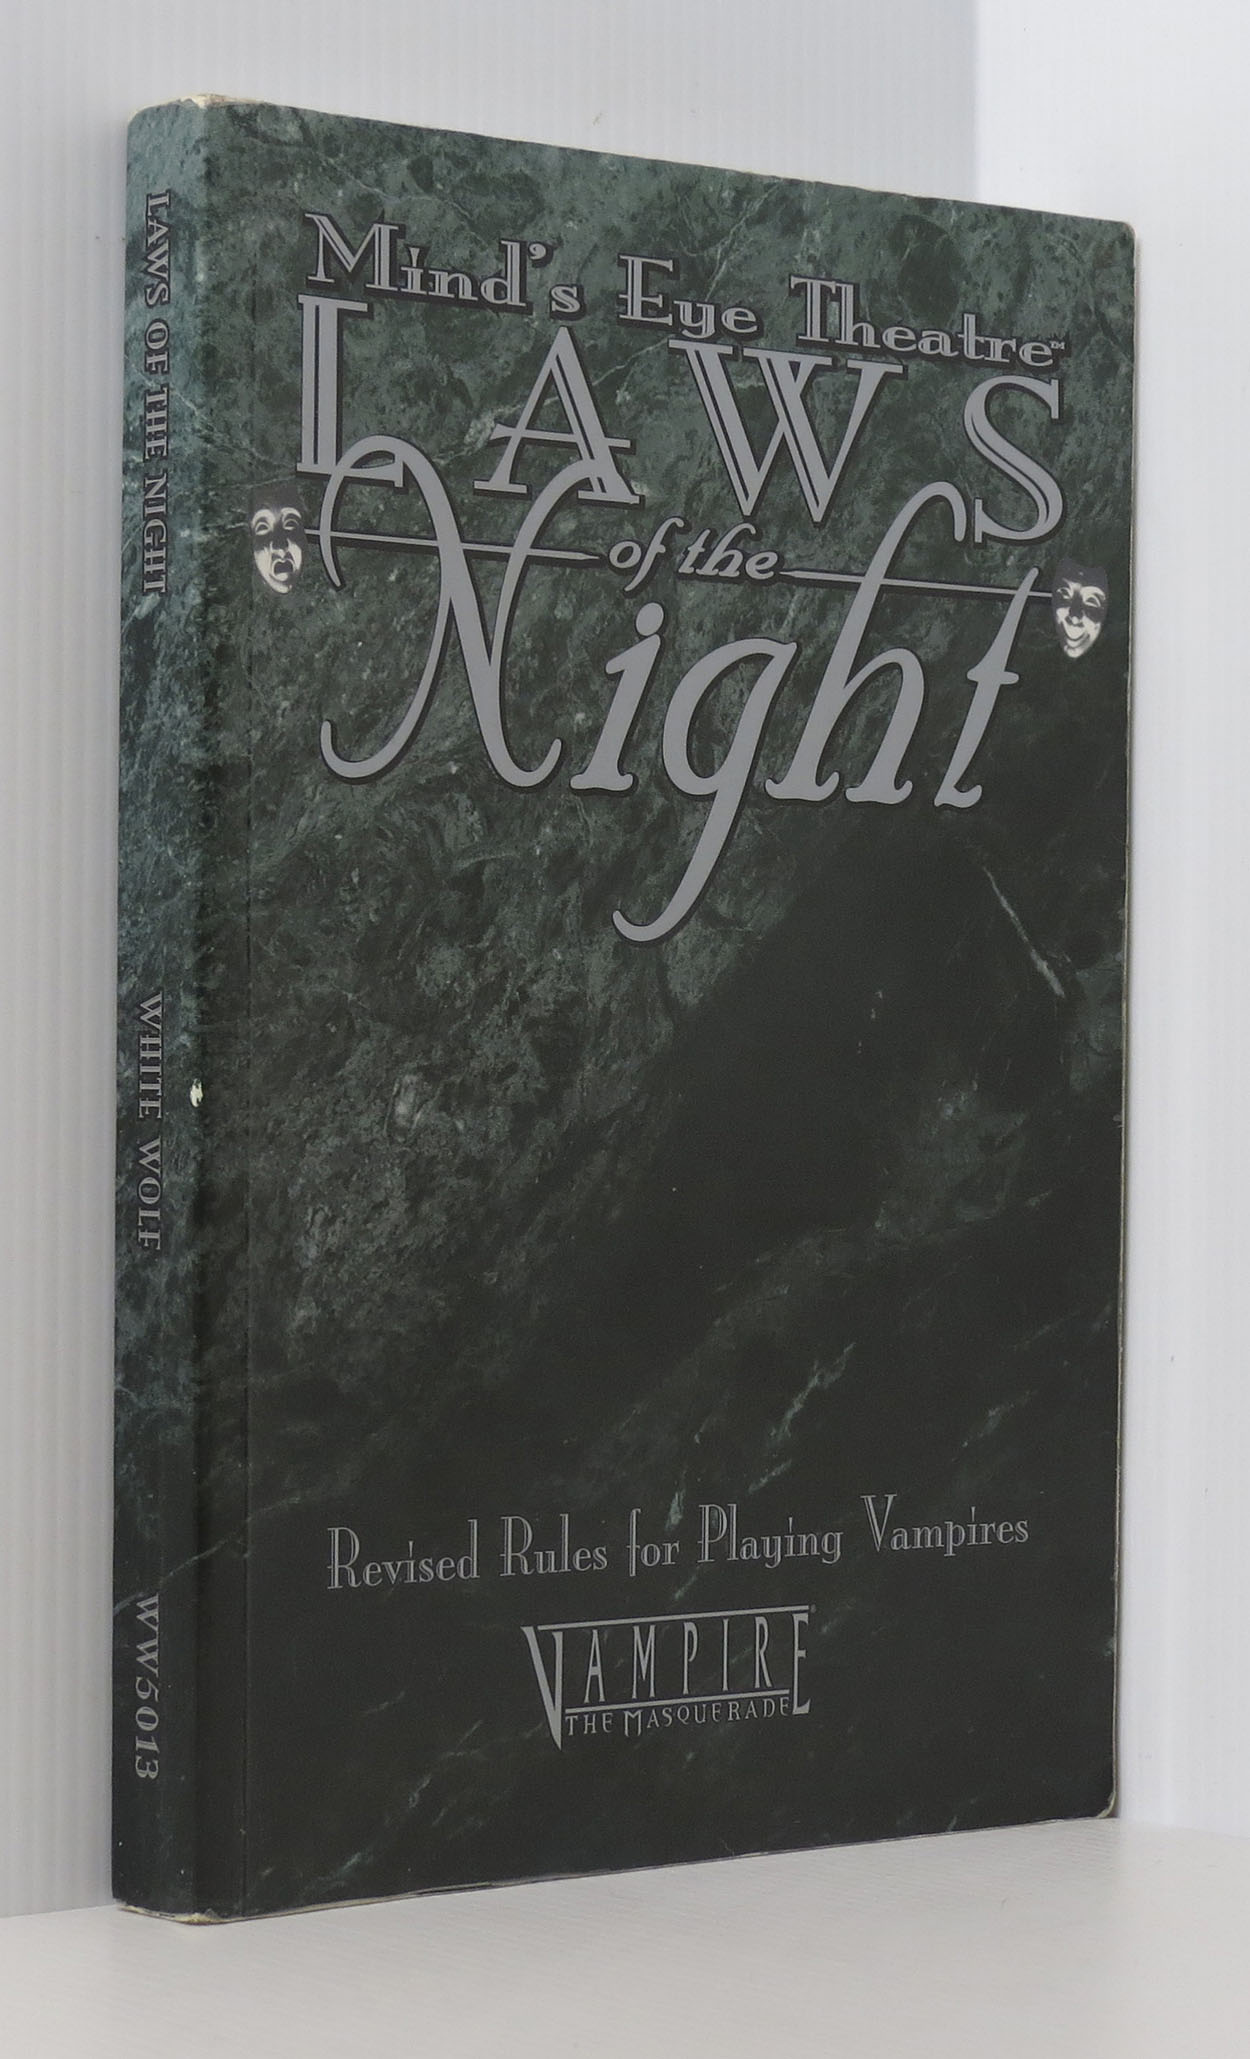 Image for Laws of the Night: Revised Rules for Playing Vampires (Mind's Eye Theatre: Vampire- The Masquerade)